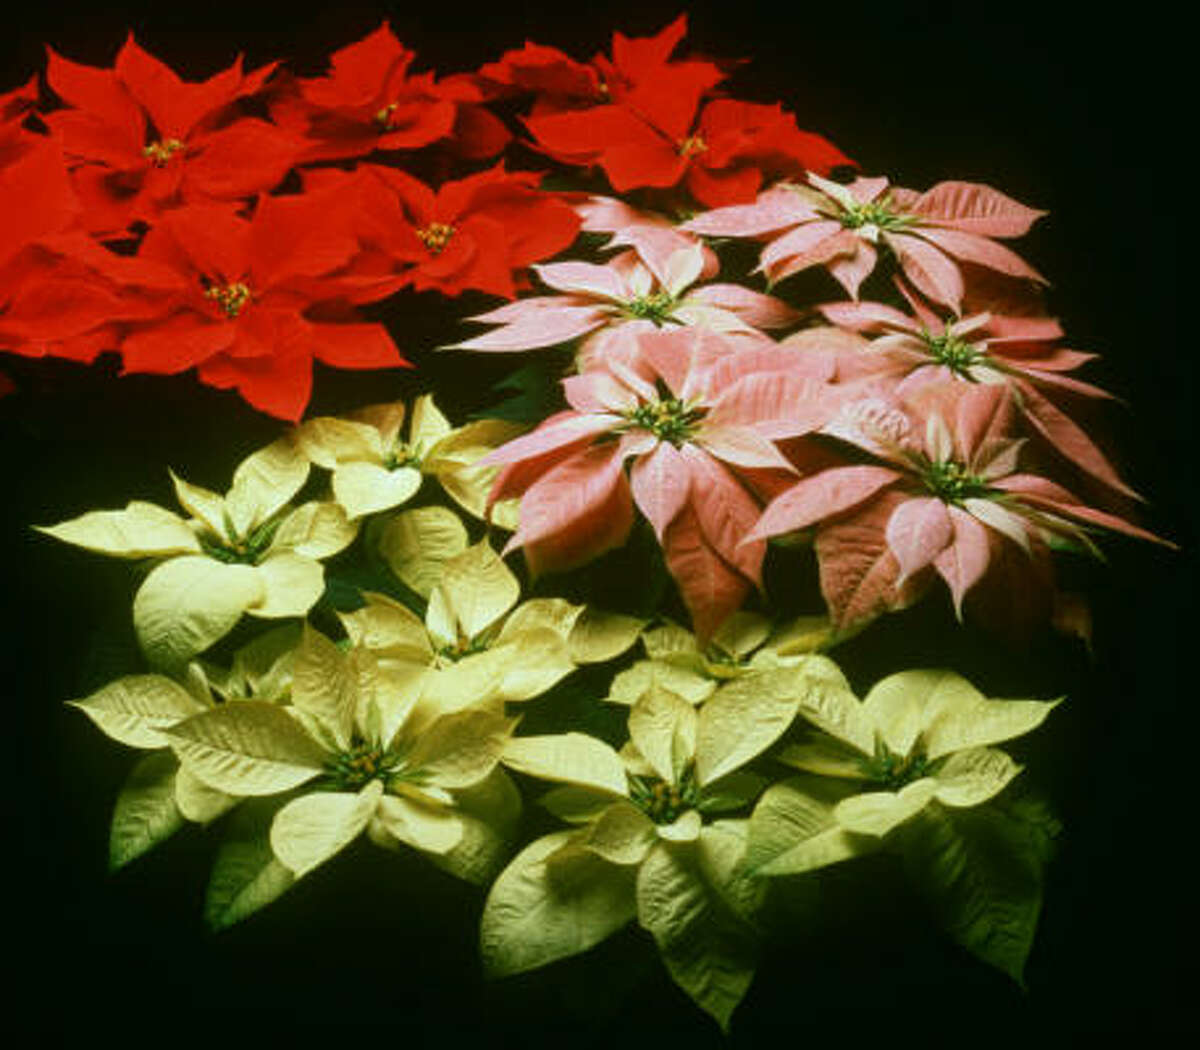 The poinsettia is available not only in the ever-popular red, but also in pink, maroon, white, yellow and with marbled bracts.